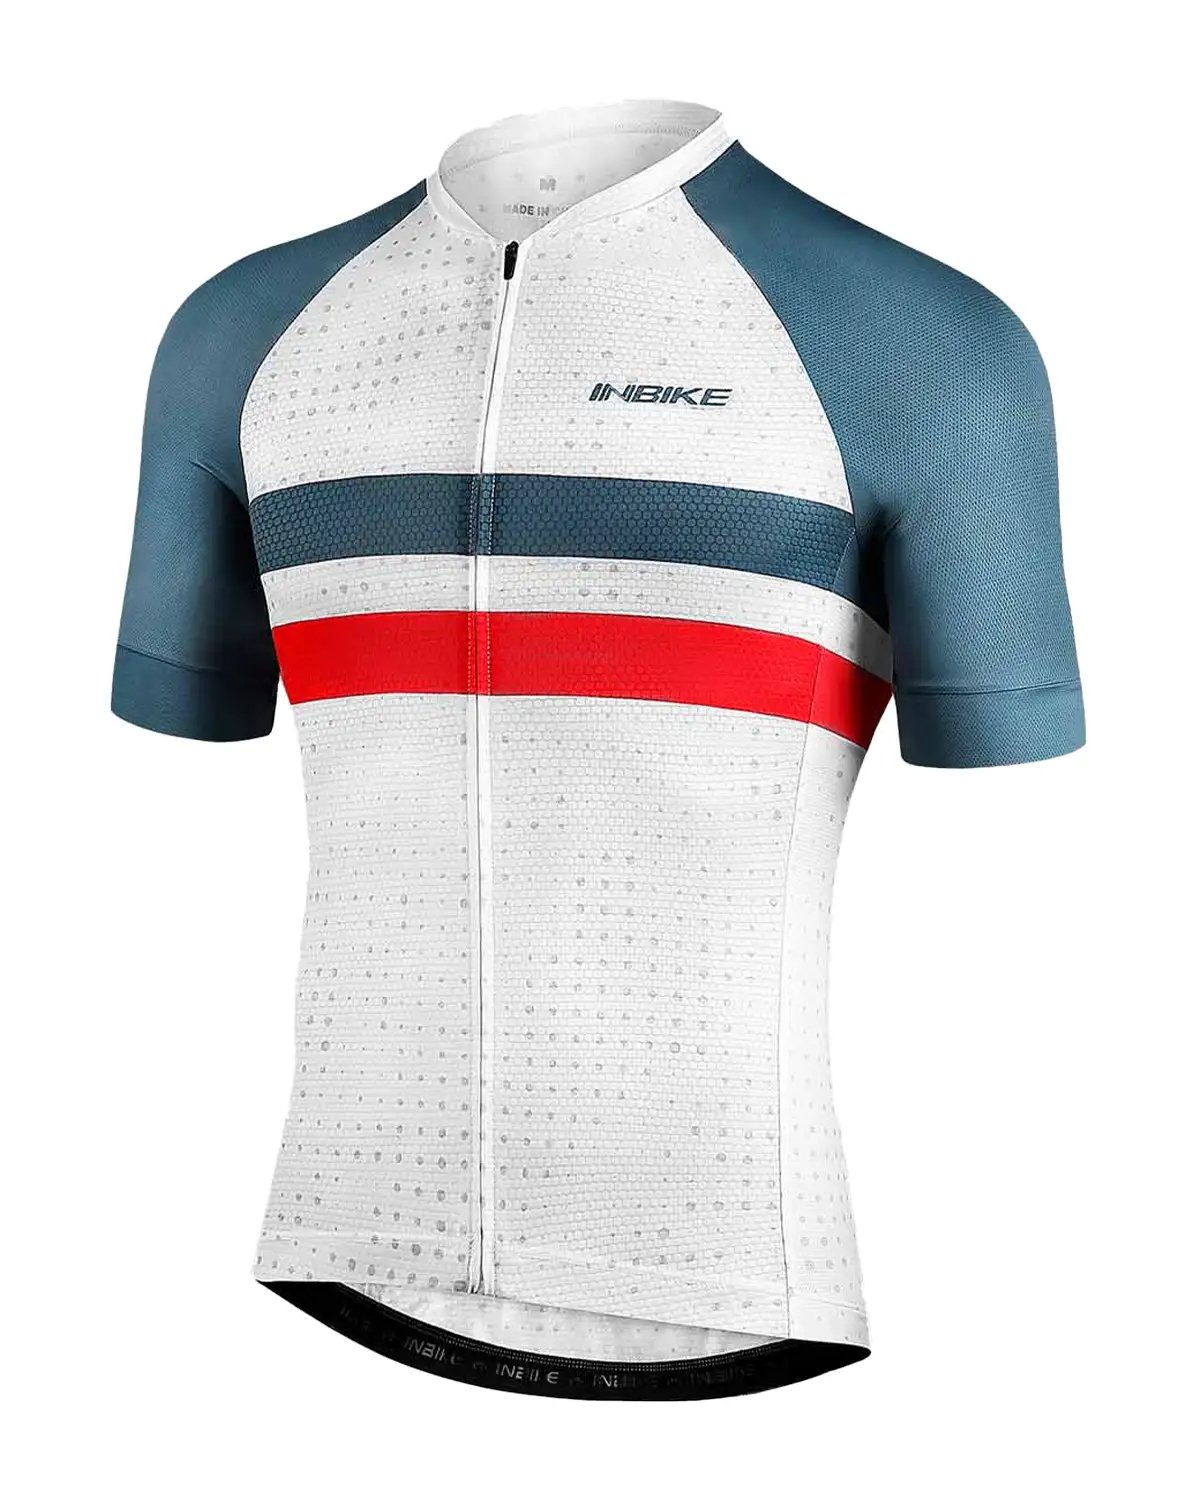 INBIKE Men Short Sleeve Cycling Jersey Cycling Shirts with Pockets Sale